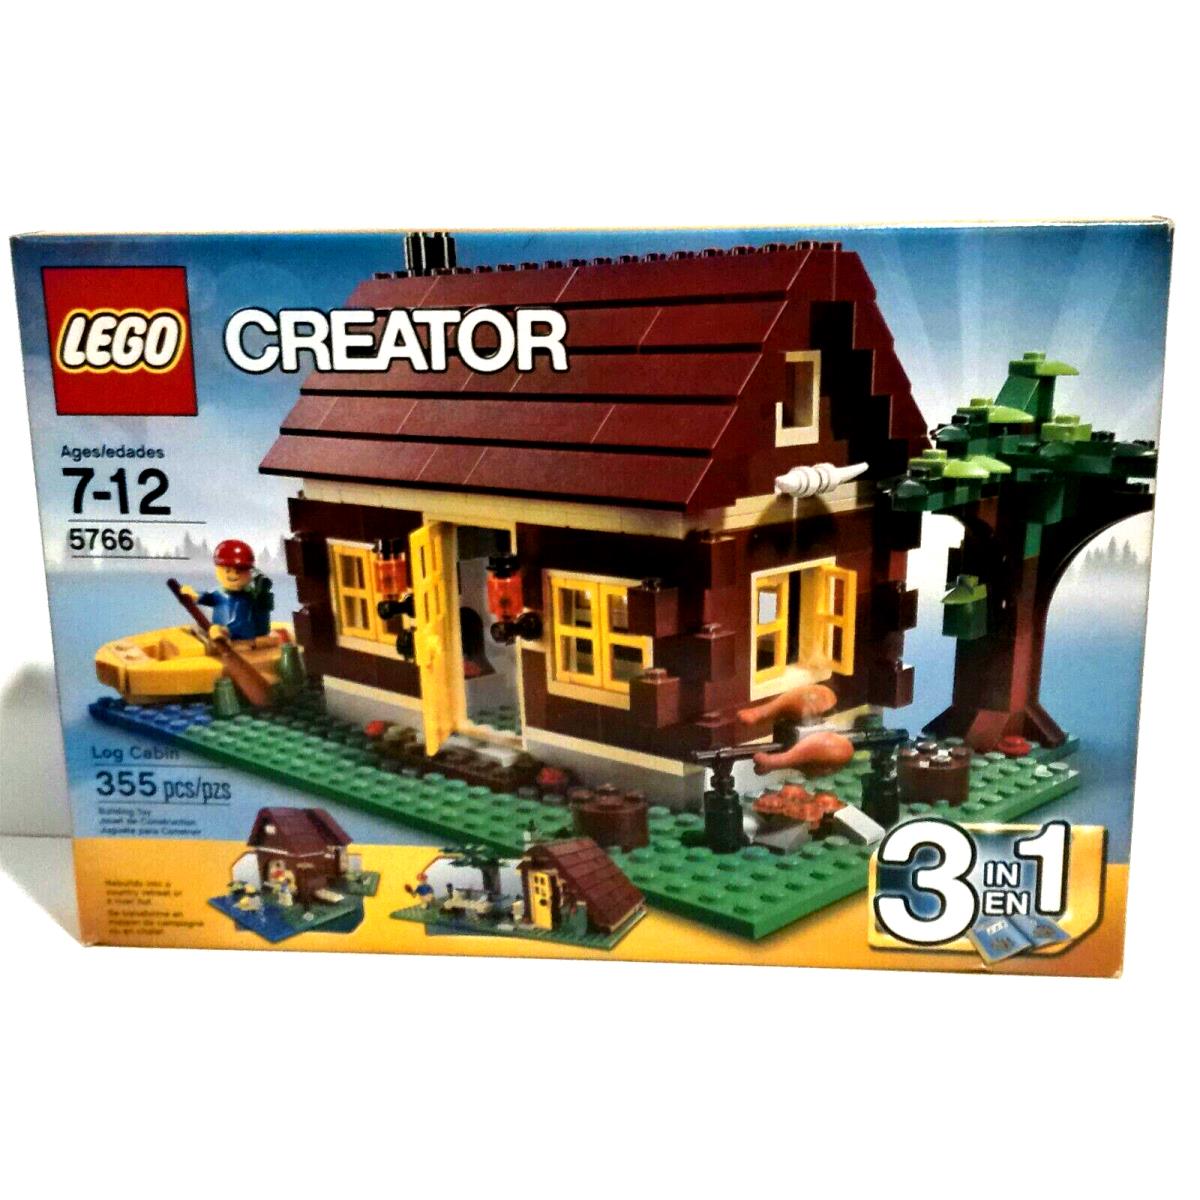 Lego Creator 5766 Log Cabin 3 IN 1 Building Set Complete w/ Box Retired